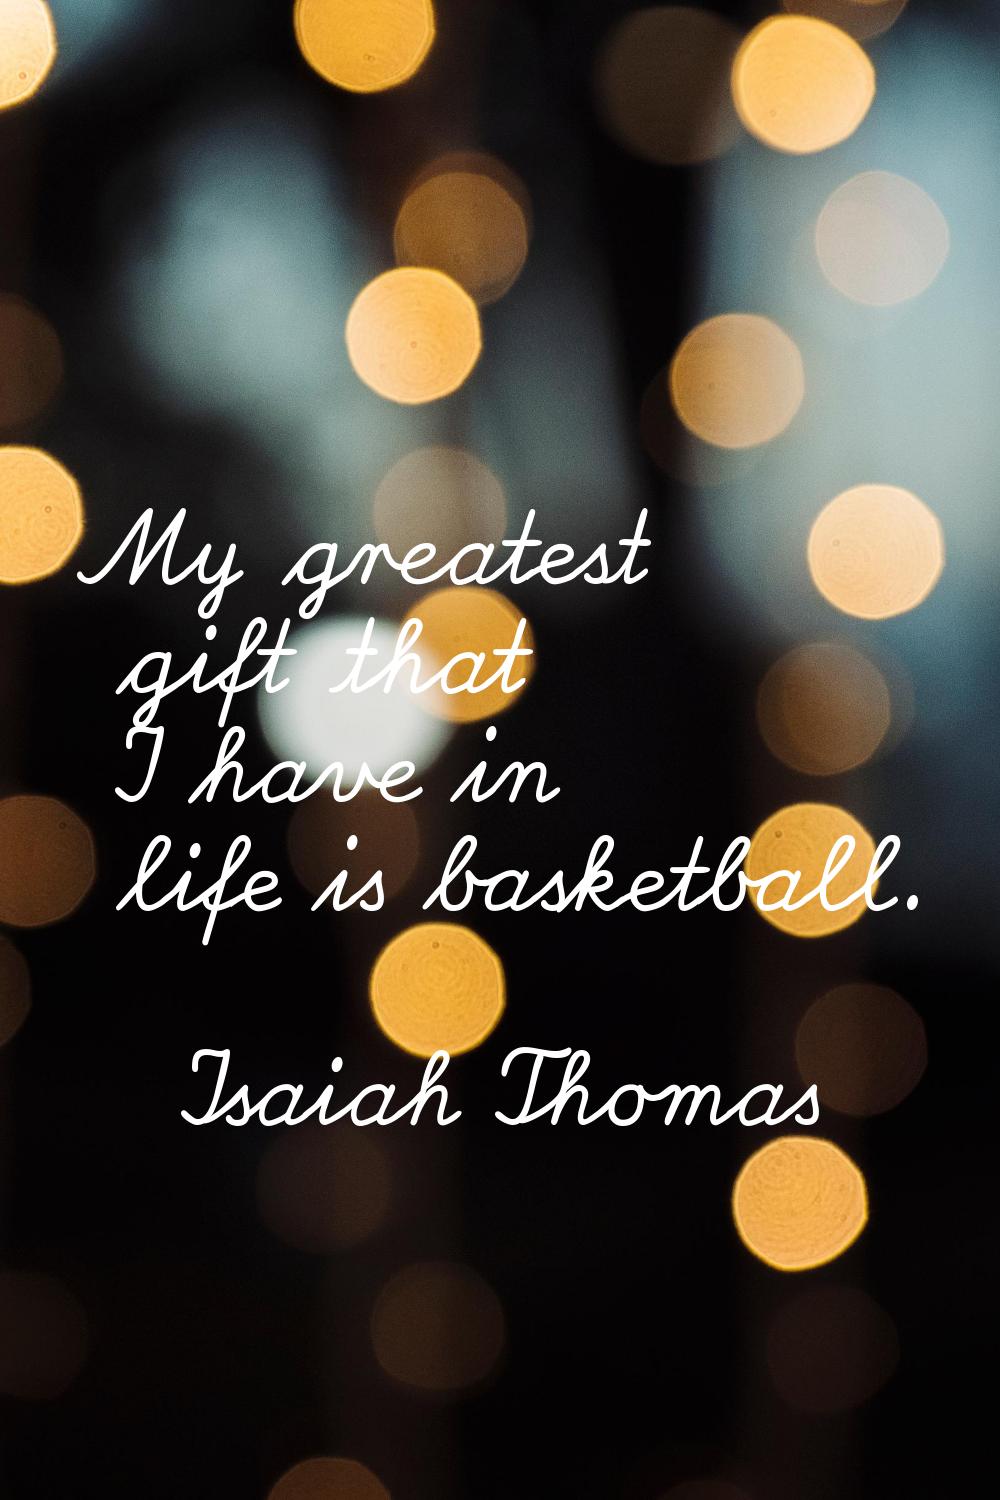 My greatest gift that I have in life is basketball.